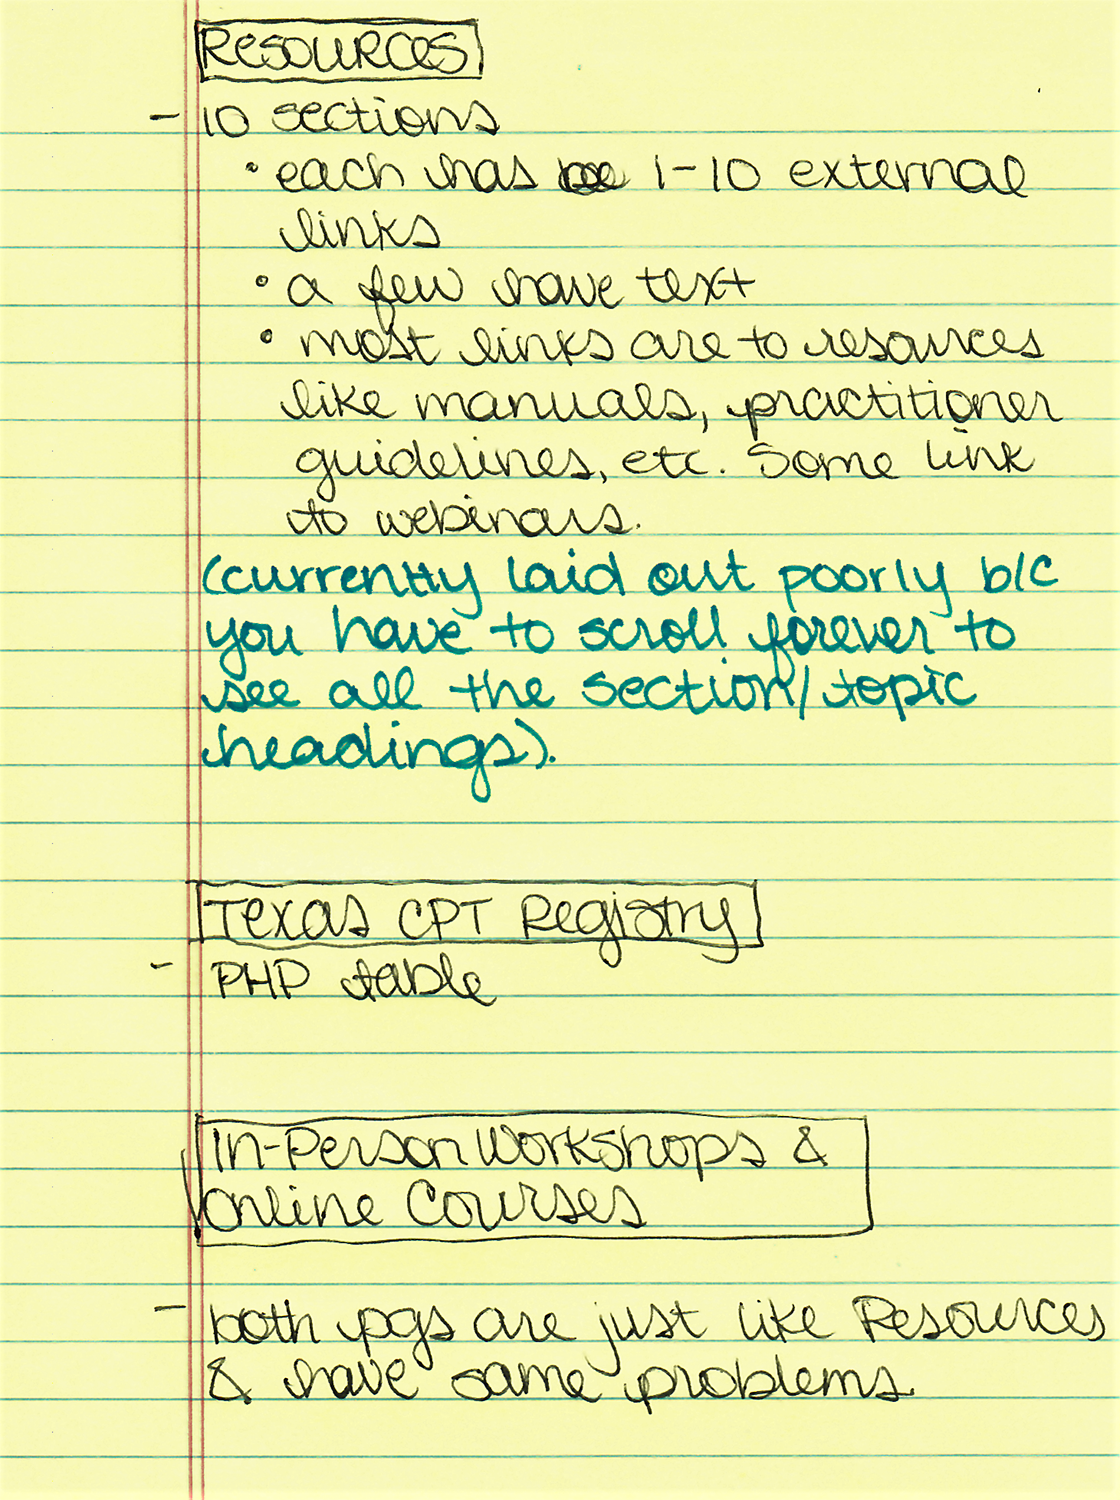 These are handwritten notes I took of the content that was on each page of the website.